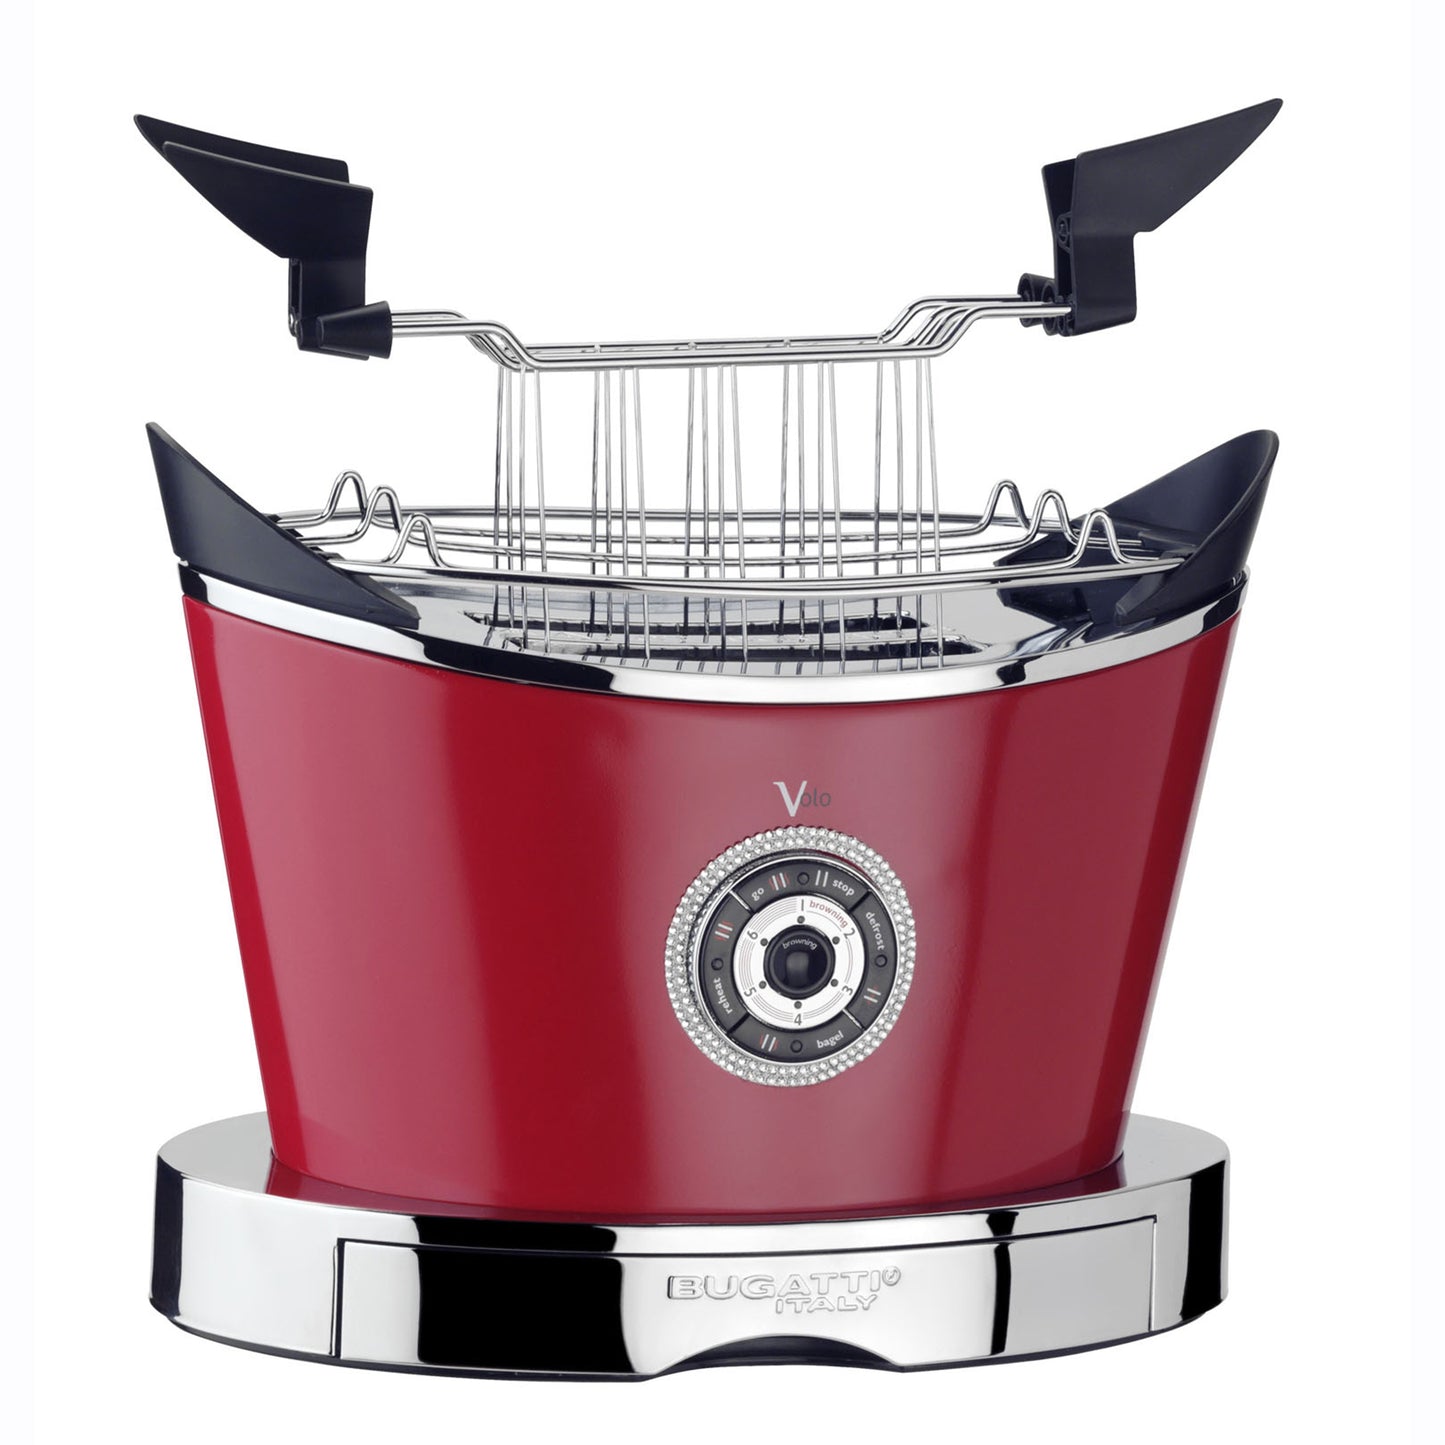 Bugatti Italy Volo Light Details Toaster - Red